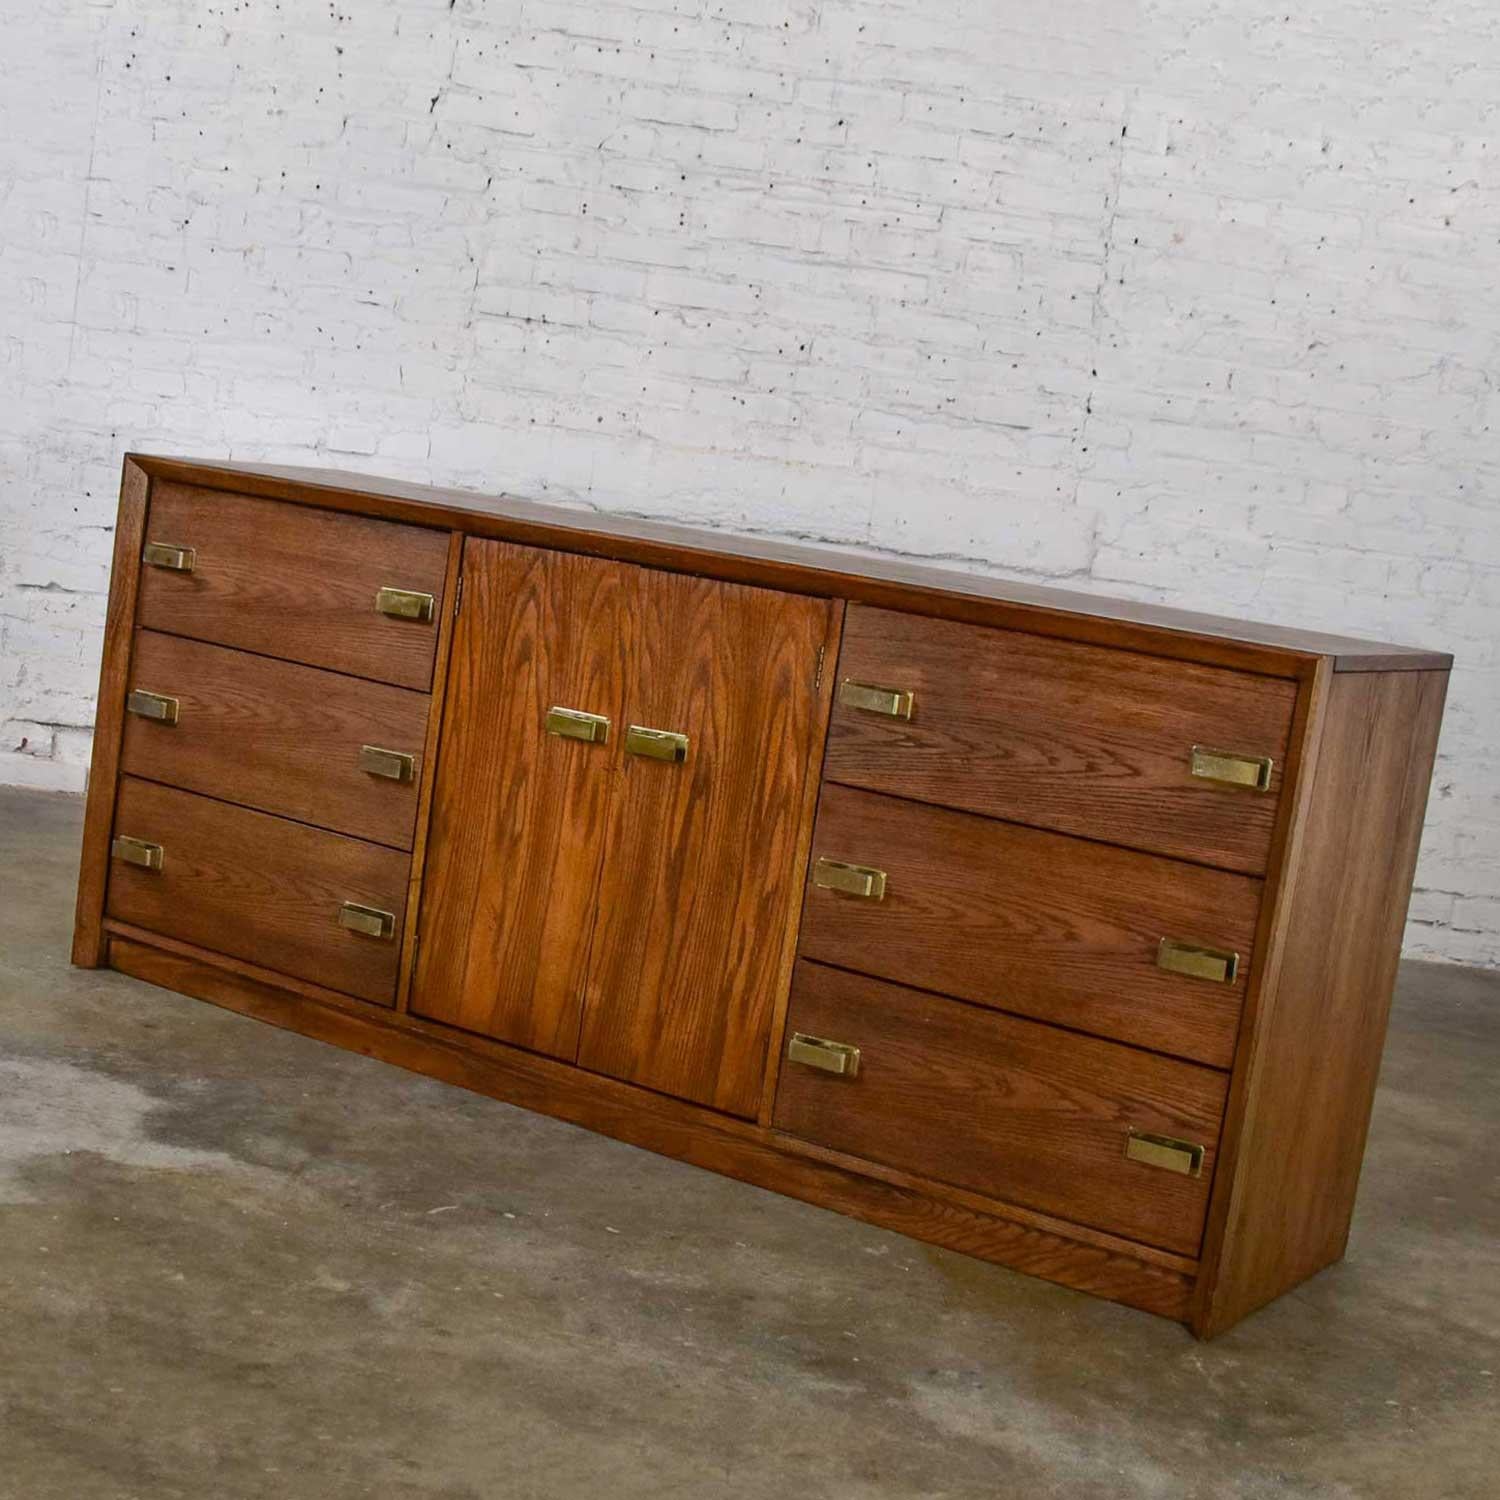 Gorgeous modern almost Brutalist Bassett credenza or buffet comprised of a medium tone finished wood (possibly oak, ash, or hickory); brass-plated die cast pulls; six drawers (three on either end), and two center doors with 3 interior drawers. In